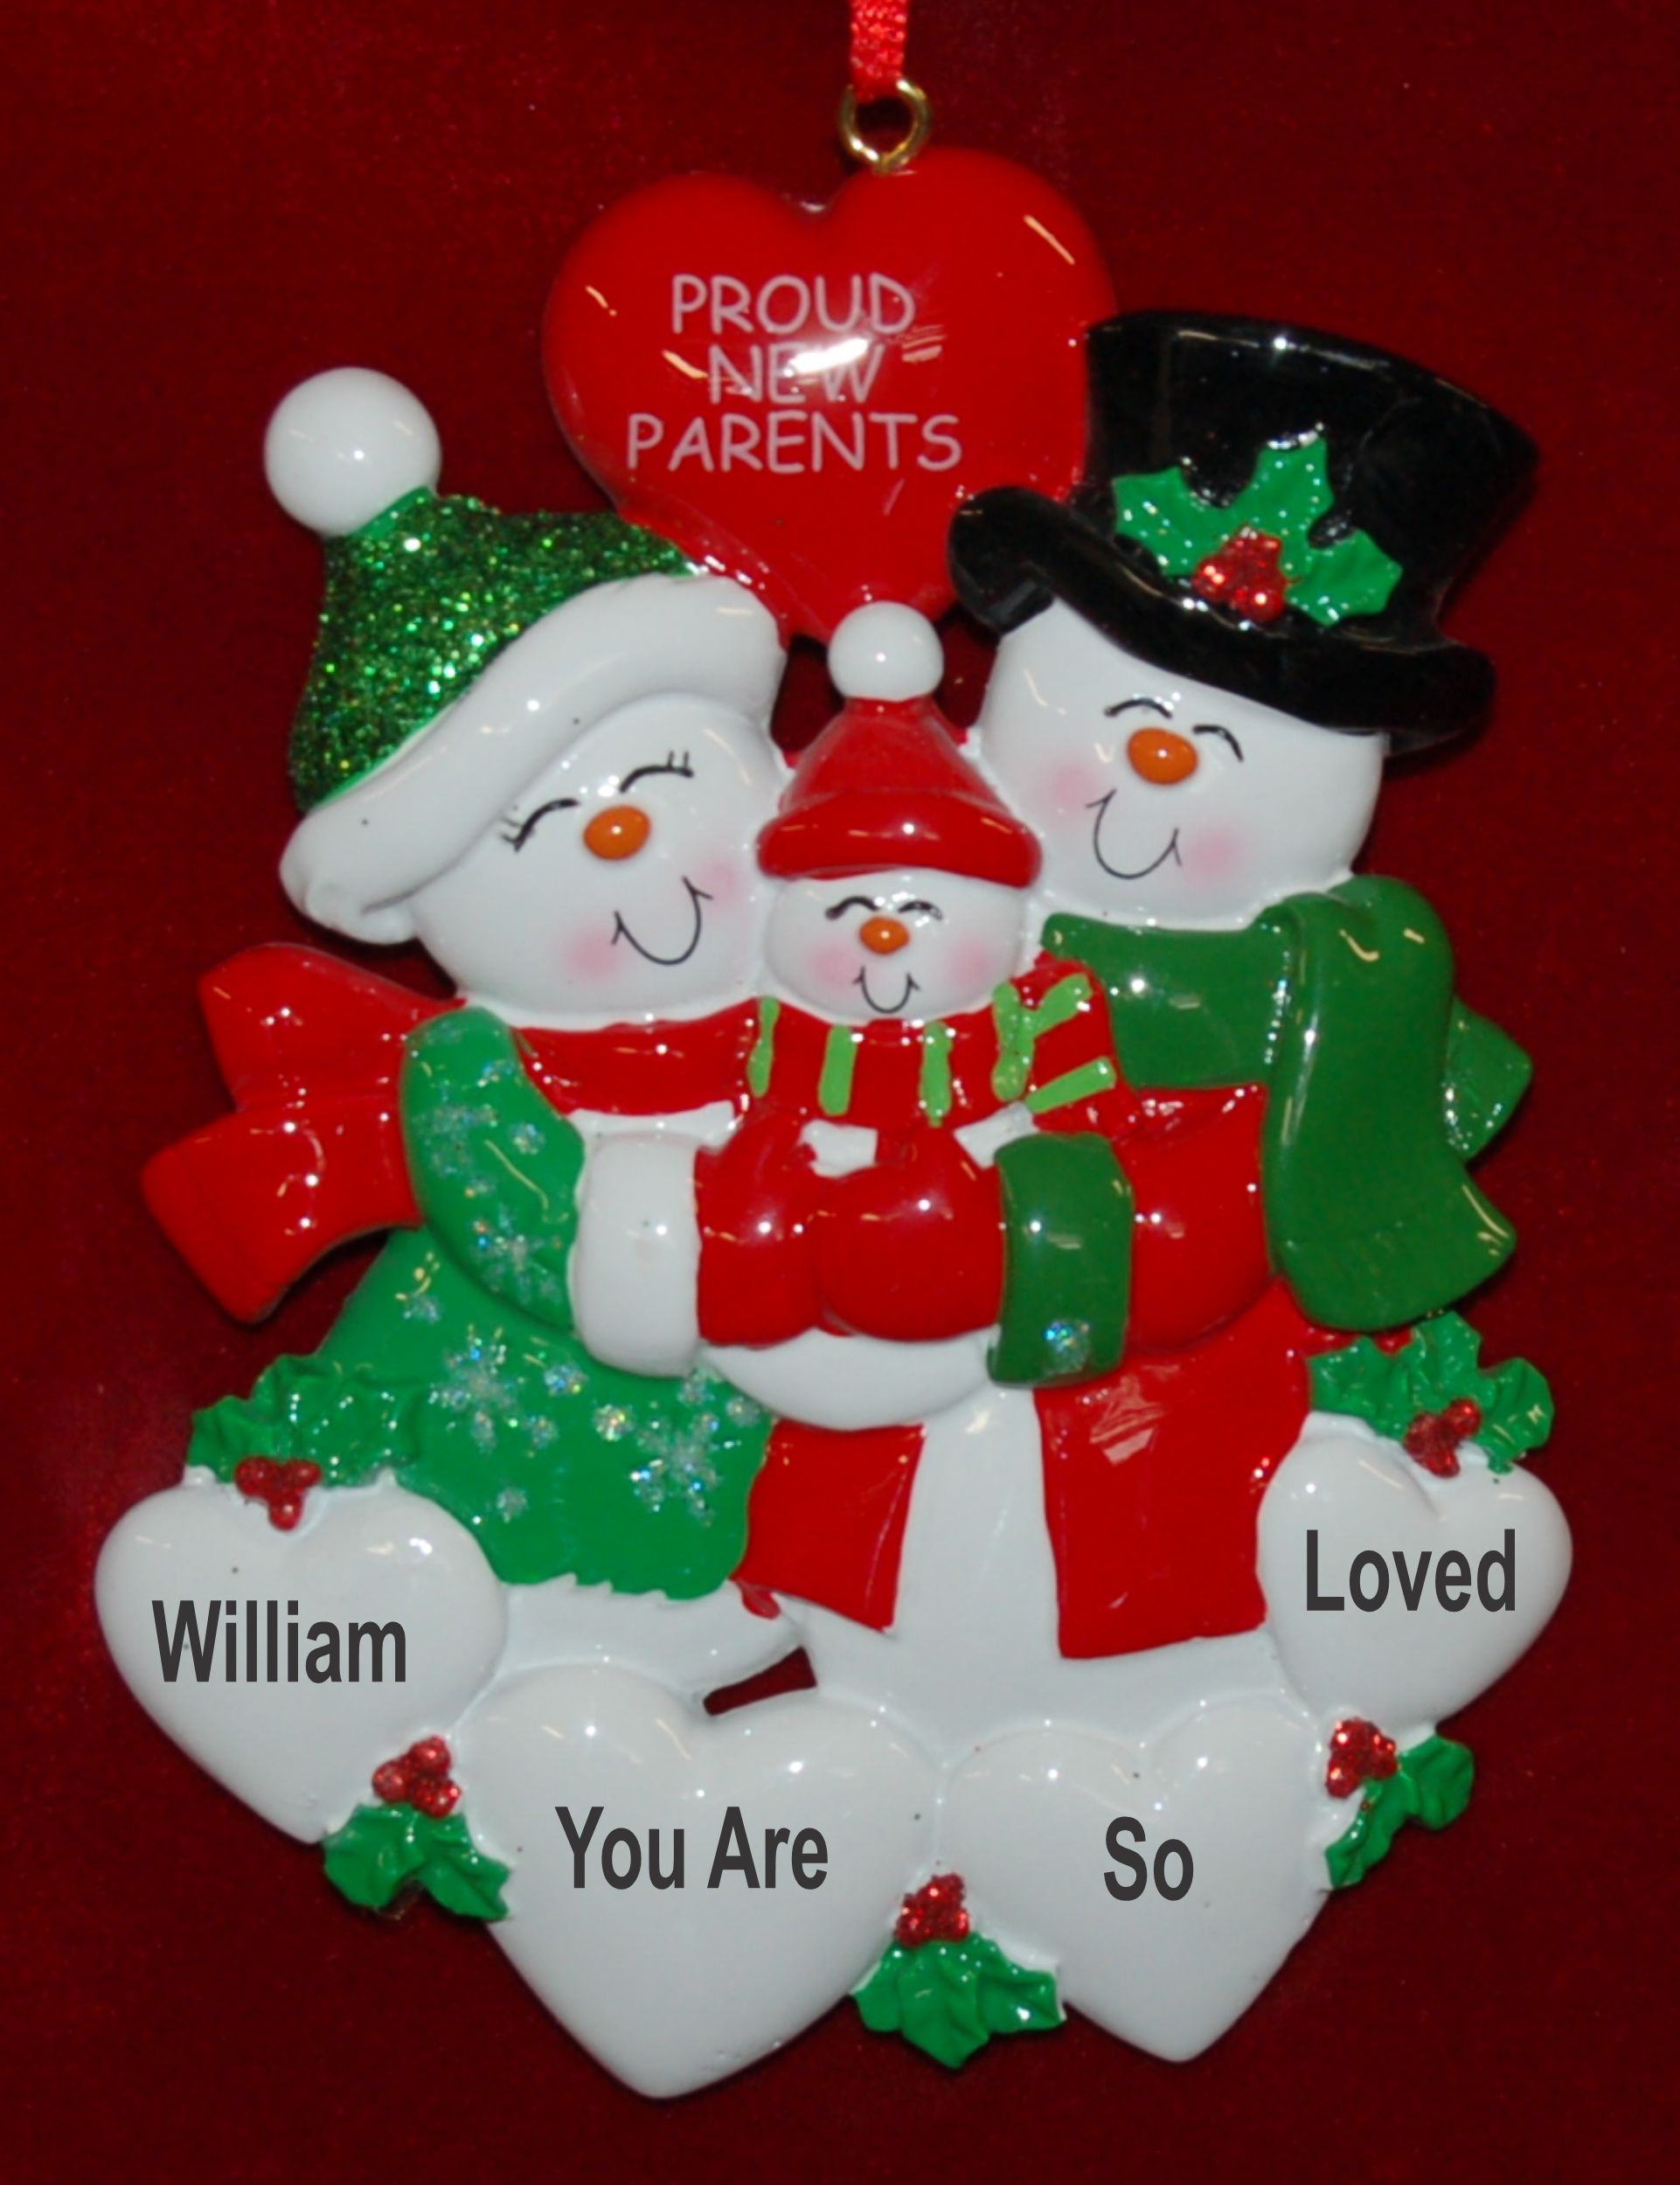 Personalized New Parents Christmas Ornament Our Family Grows by Russell Rhodes